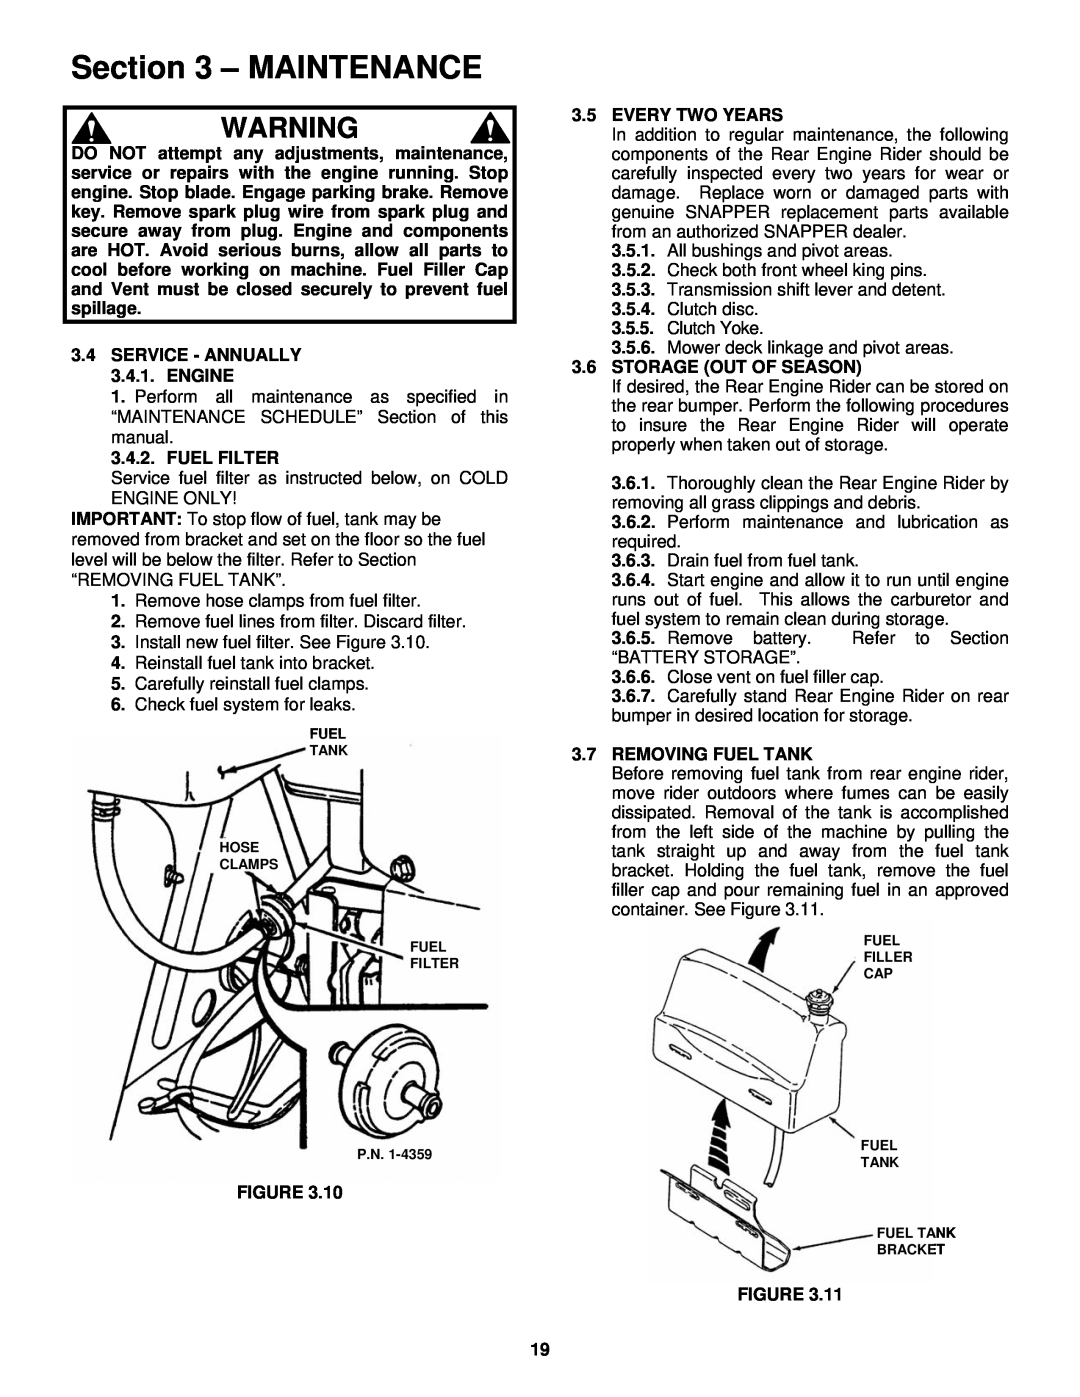 Snapper important safety instructions Maintenance, Service fuel filter as instructed below, on COLD ENGINE ONLY 